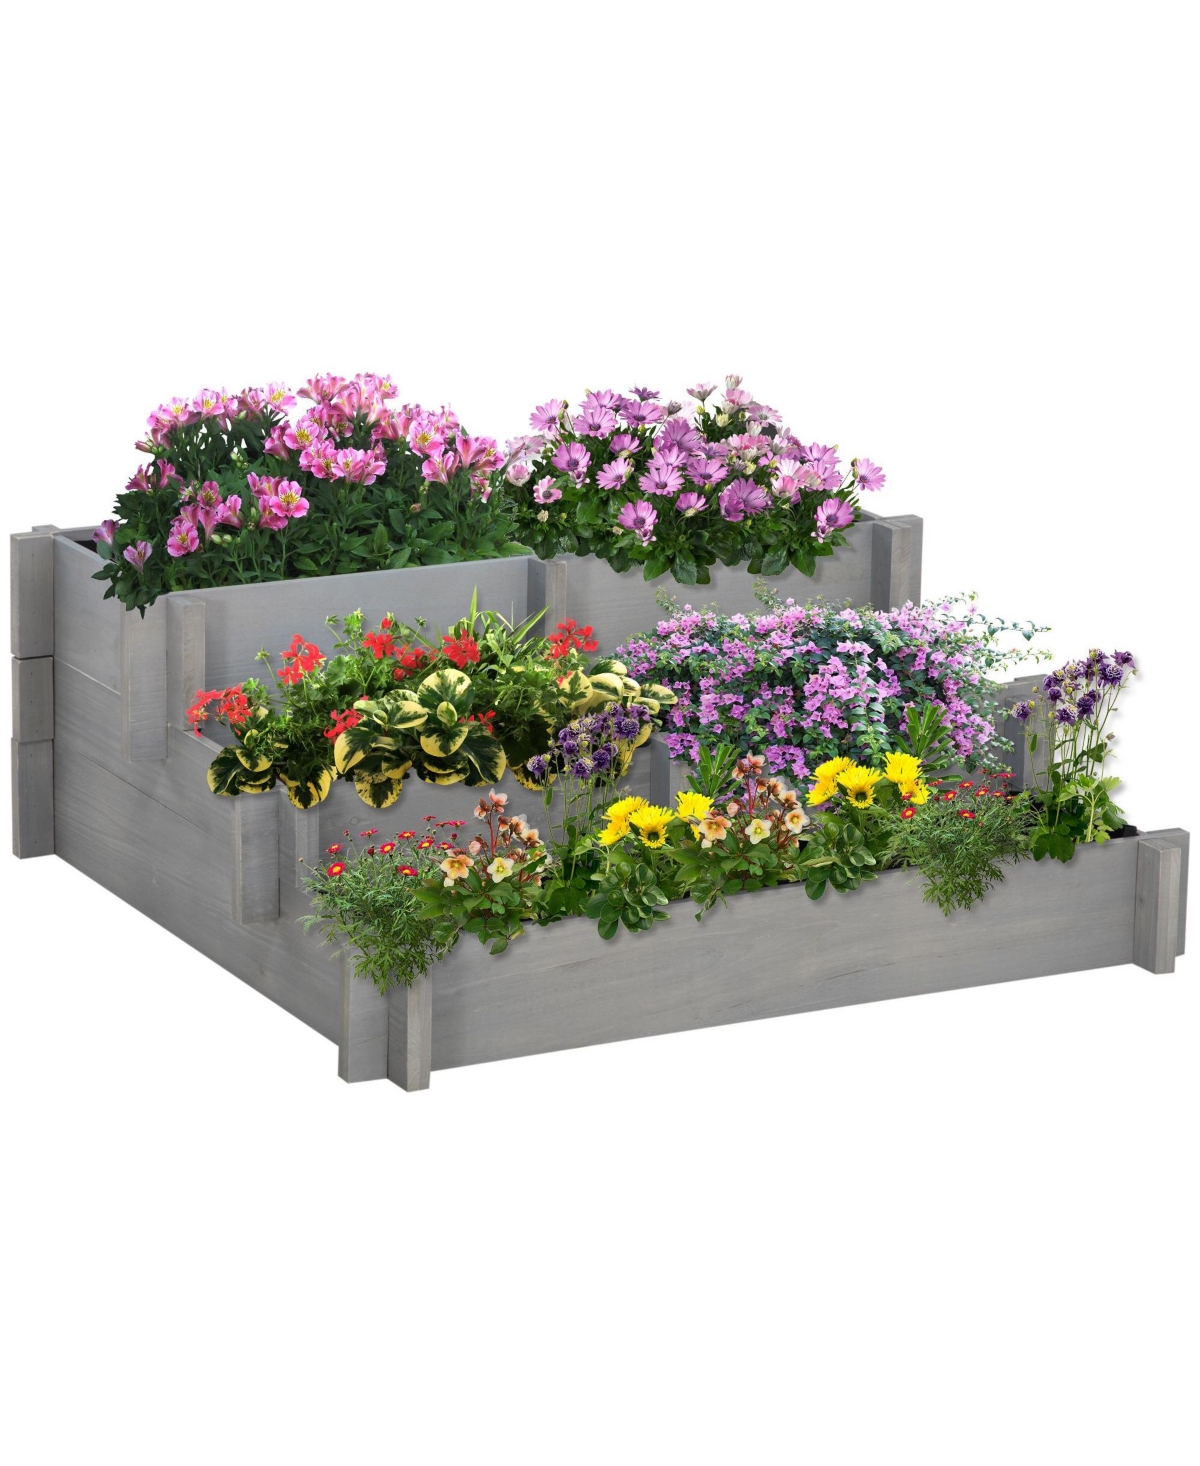 3-Tier Raised Garden Bed, Water Draining Fabric for Soil, Elevated Wood Flower Box for Vegetables, Herbs, Outdoor Plants, Gray - Gray